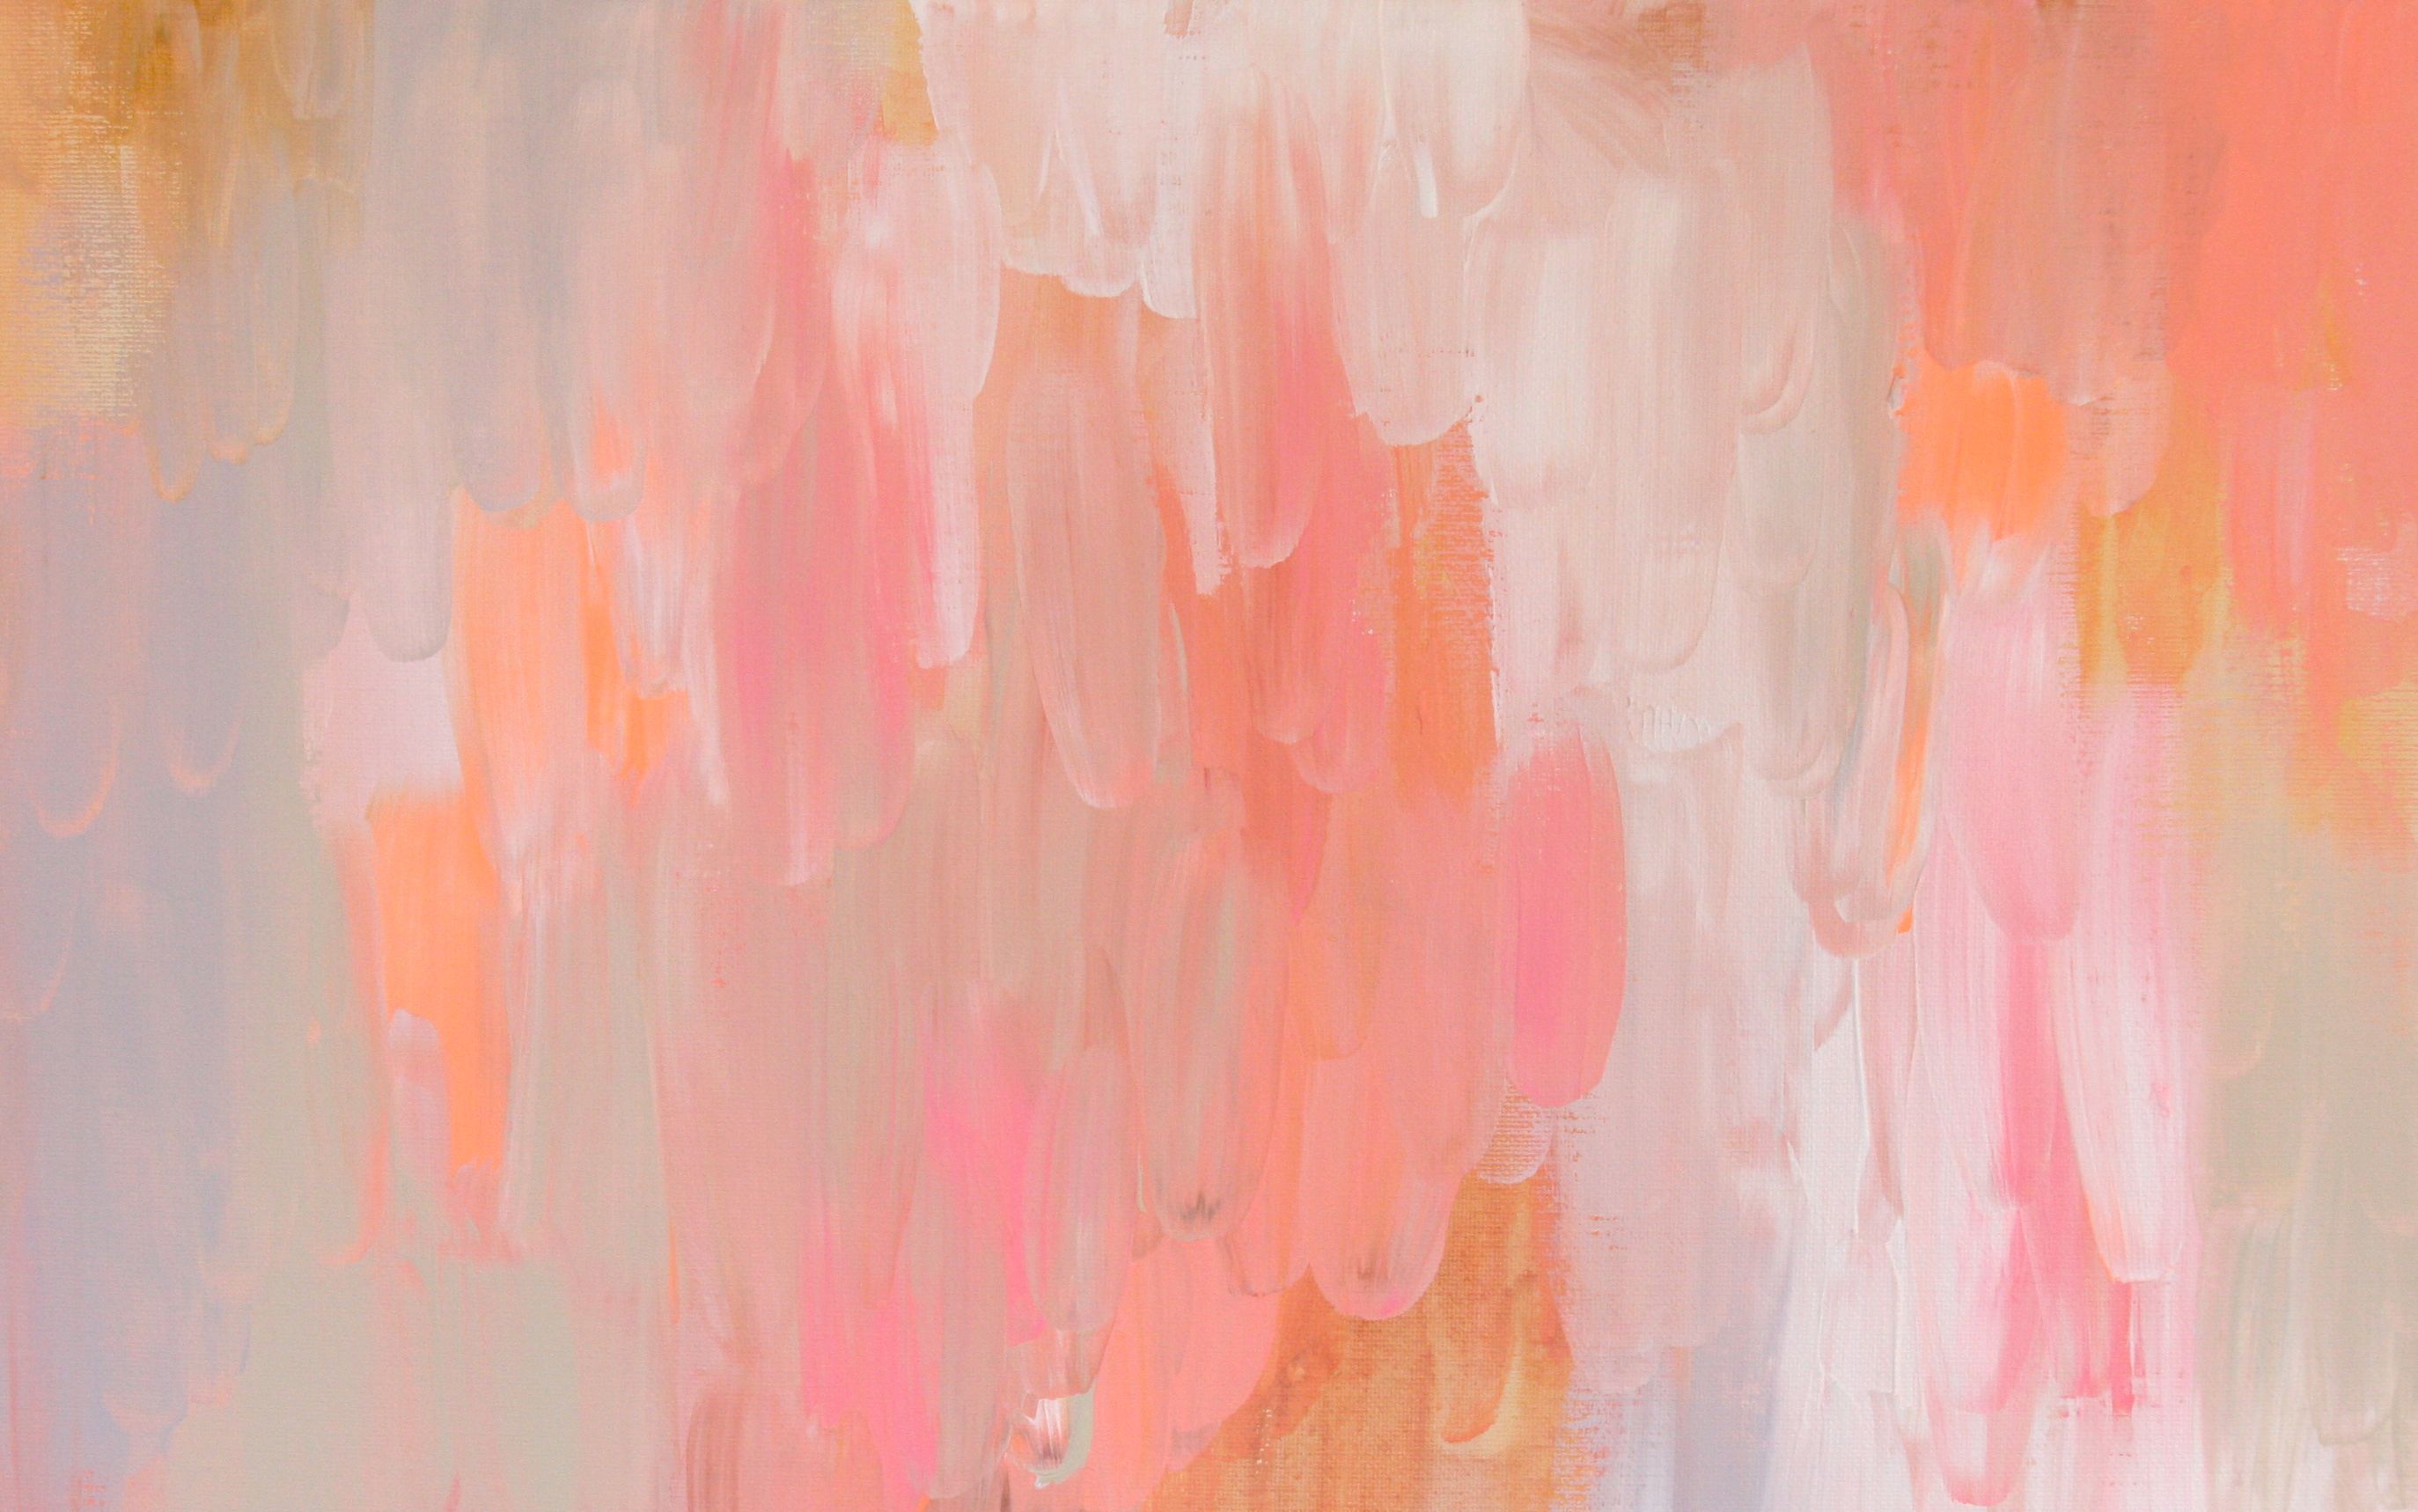 DRESS YOUR TECH / 42: Abstract Paintings by Elise Pescheret. 4 FREE downloads. Use as. Desktop wallpaper art, Desktop wallpaper fall, Watercolor desktop wallpaper